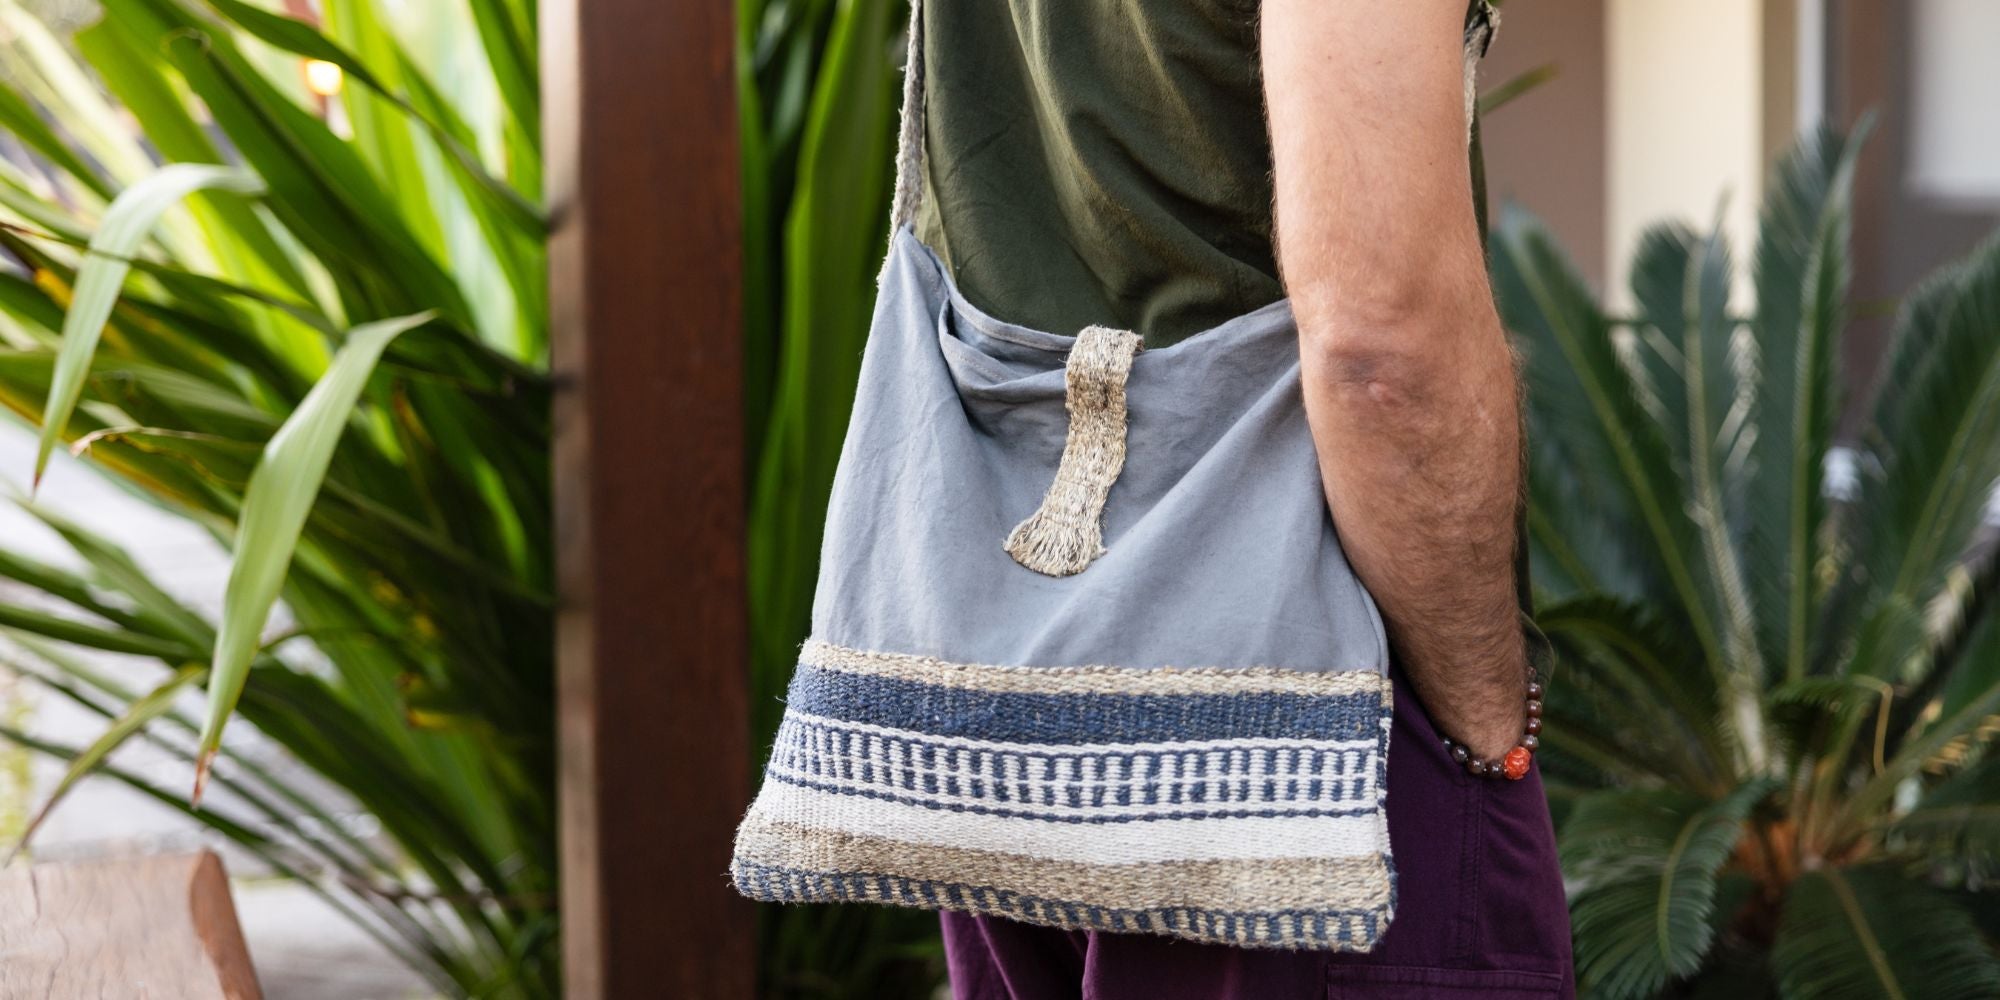 Surya The Label ethical handmade hemp bags for men made in Nepal